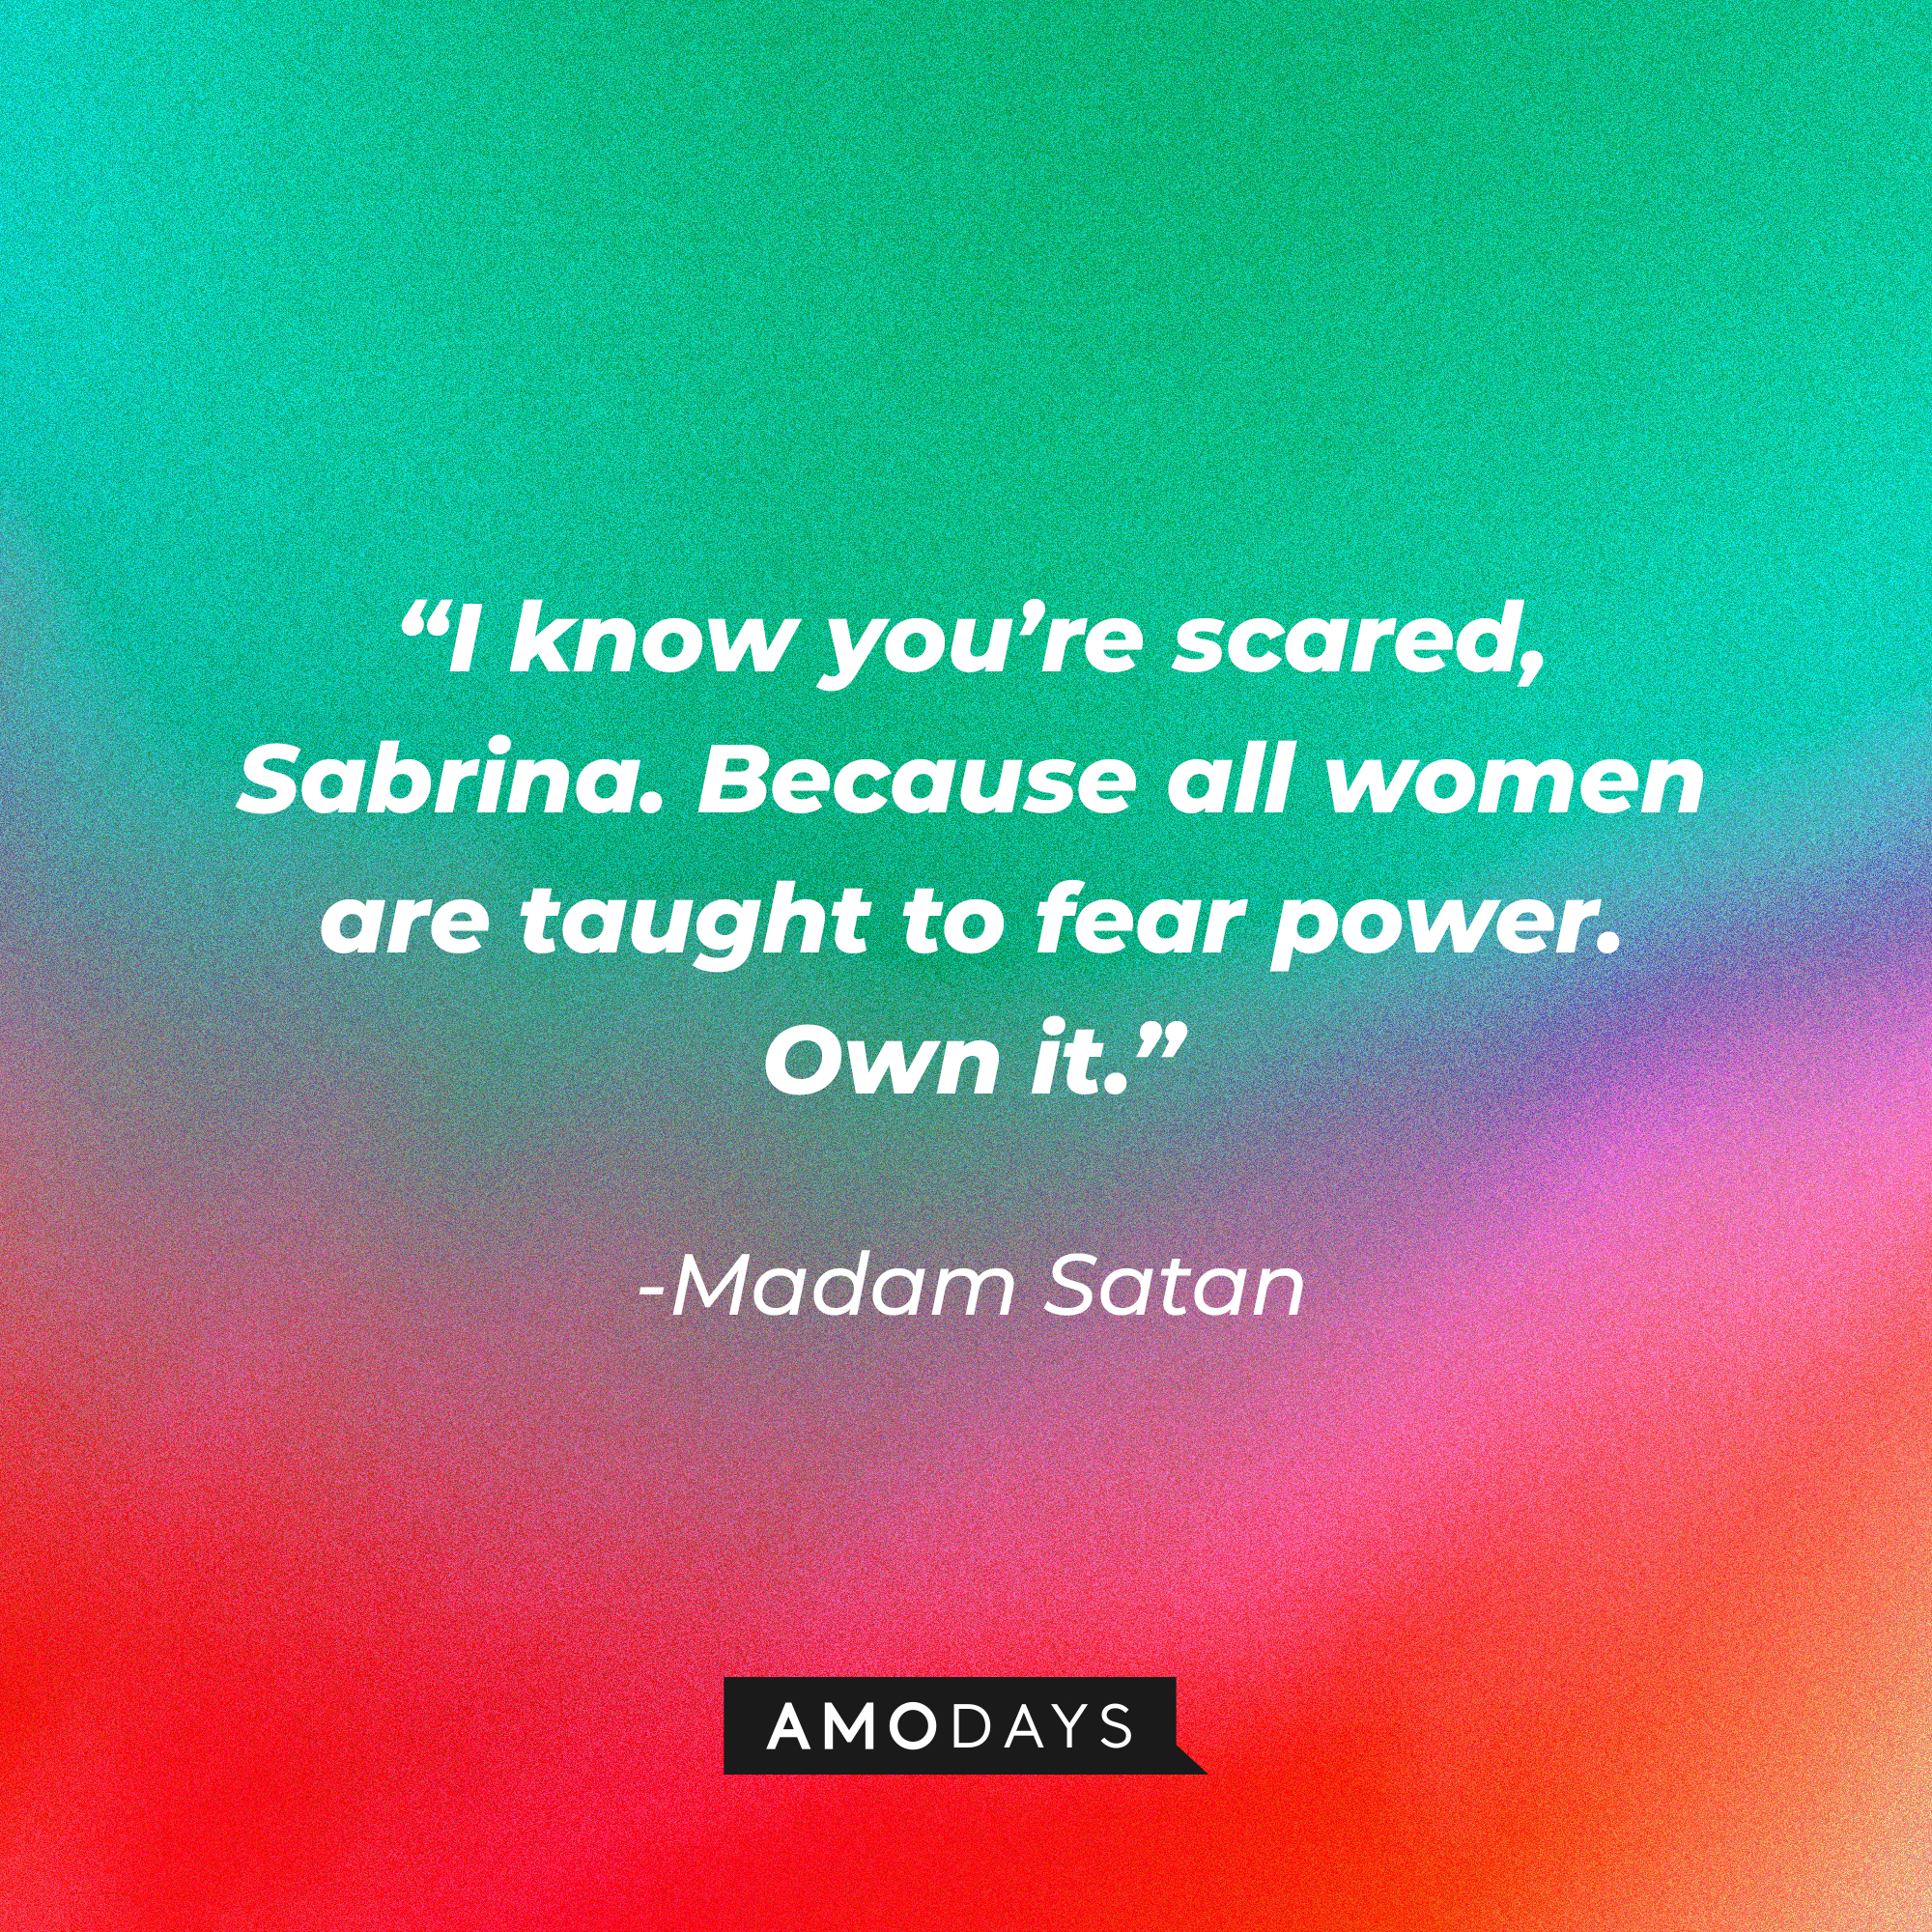 Madam Satan's quote: “I know you’re scared, Sabrina. Because all women are taught to fear power. Own it.” | Source: Amodays